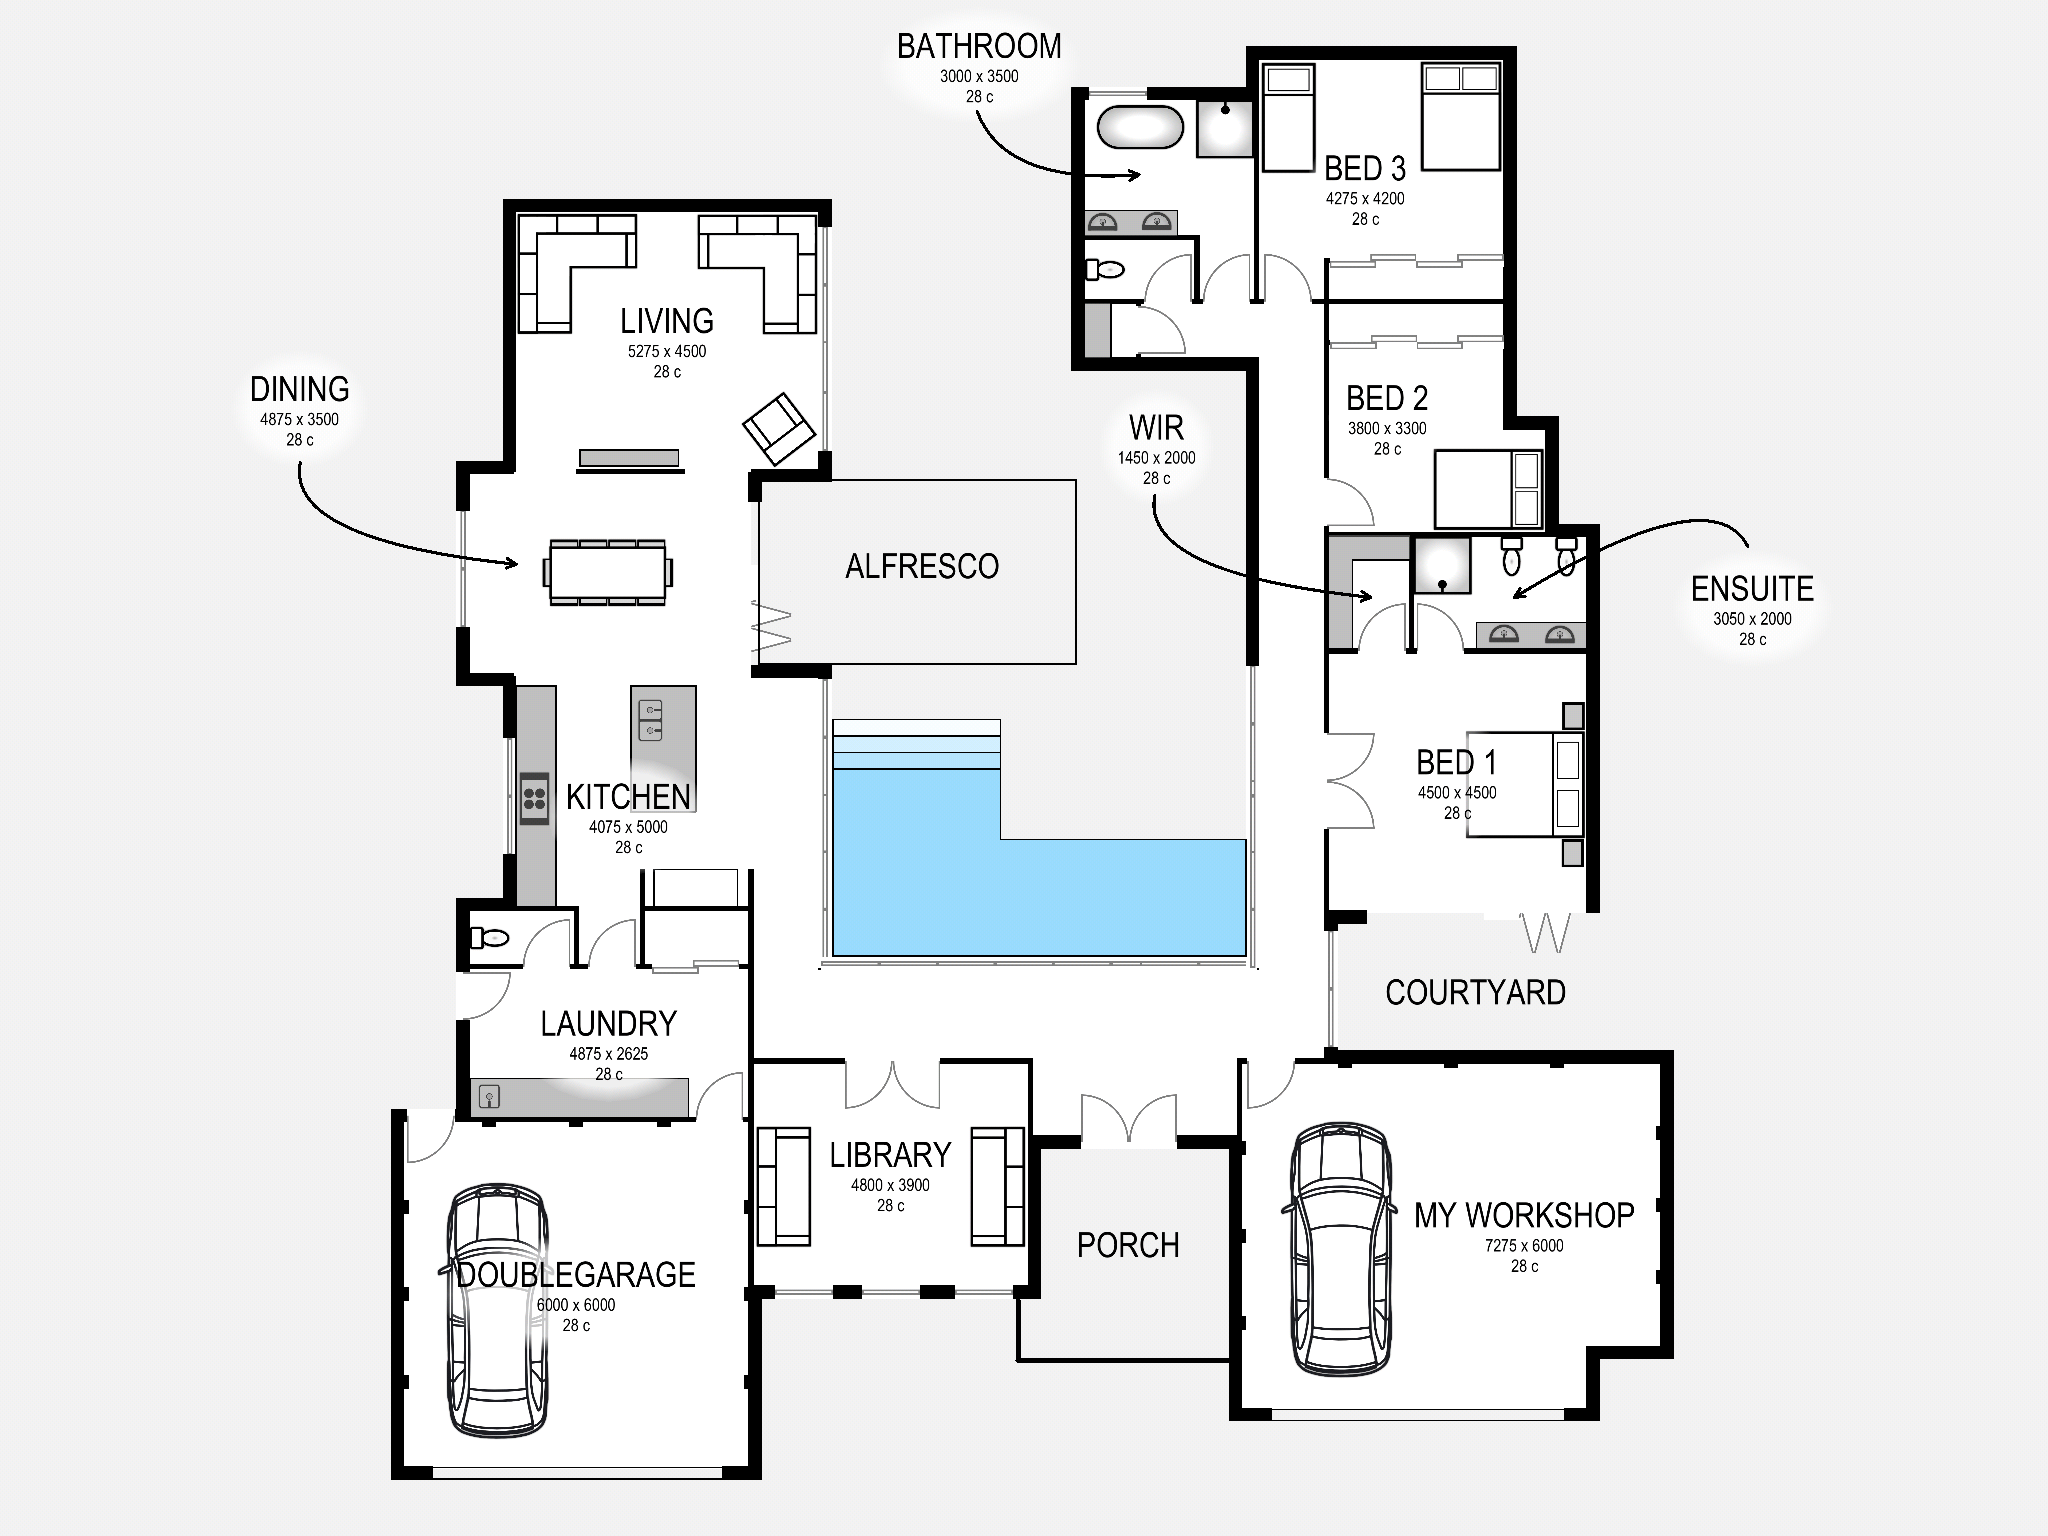 Ipad App To Draw House Plans 17 Best 1000 Ideas About Floor Plan